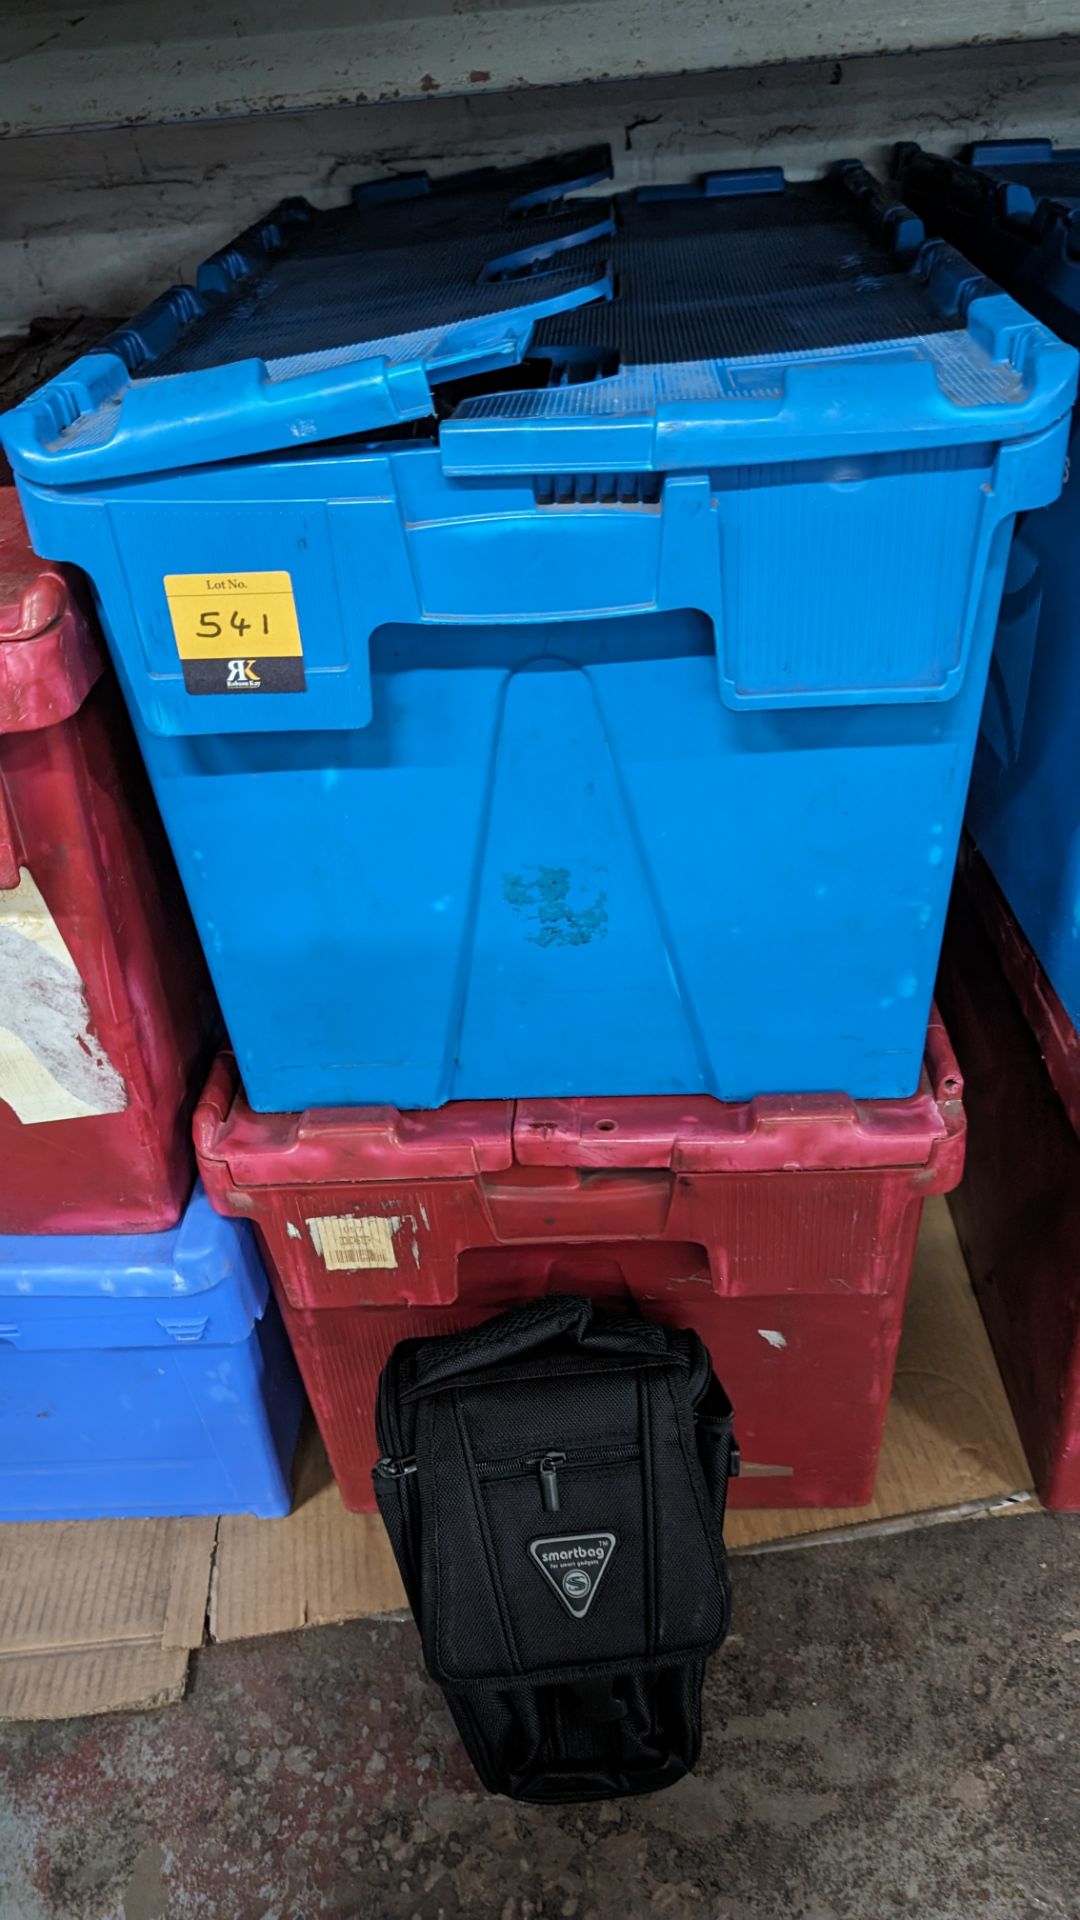 20 off camera bags - no straps. The contents of 2 crates